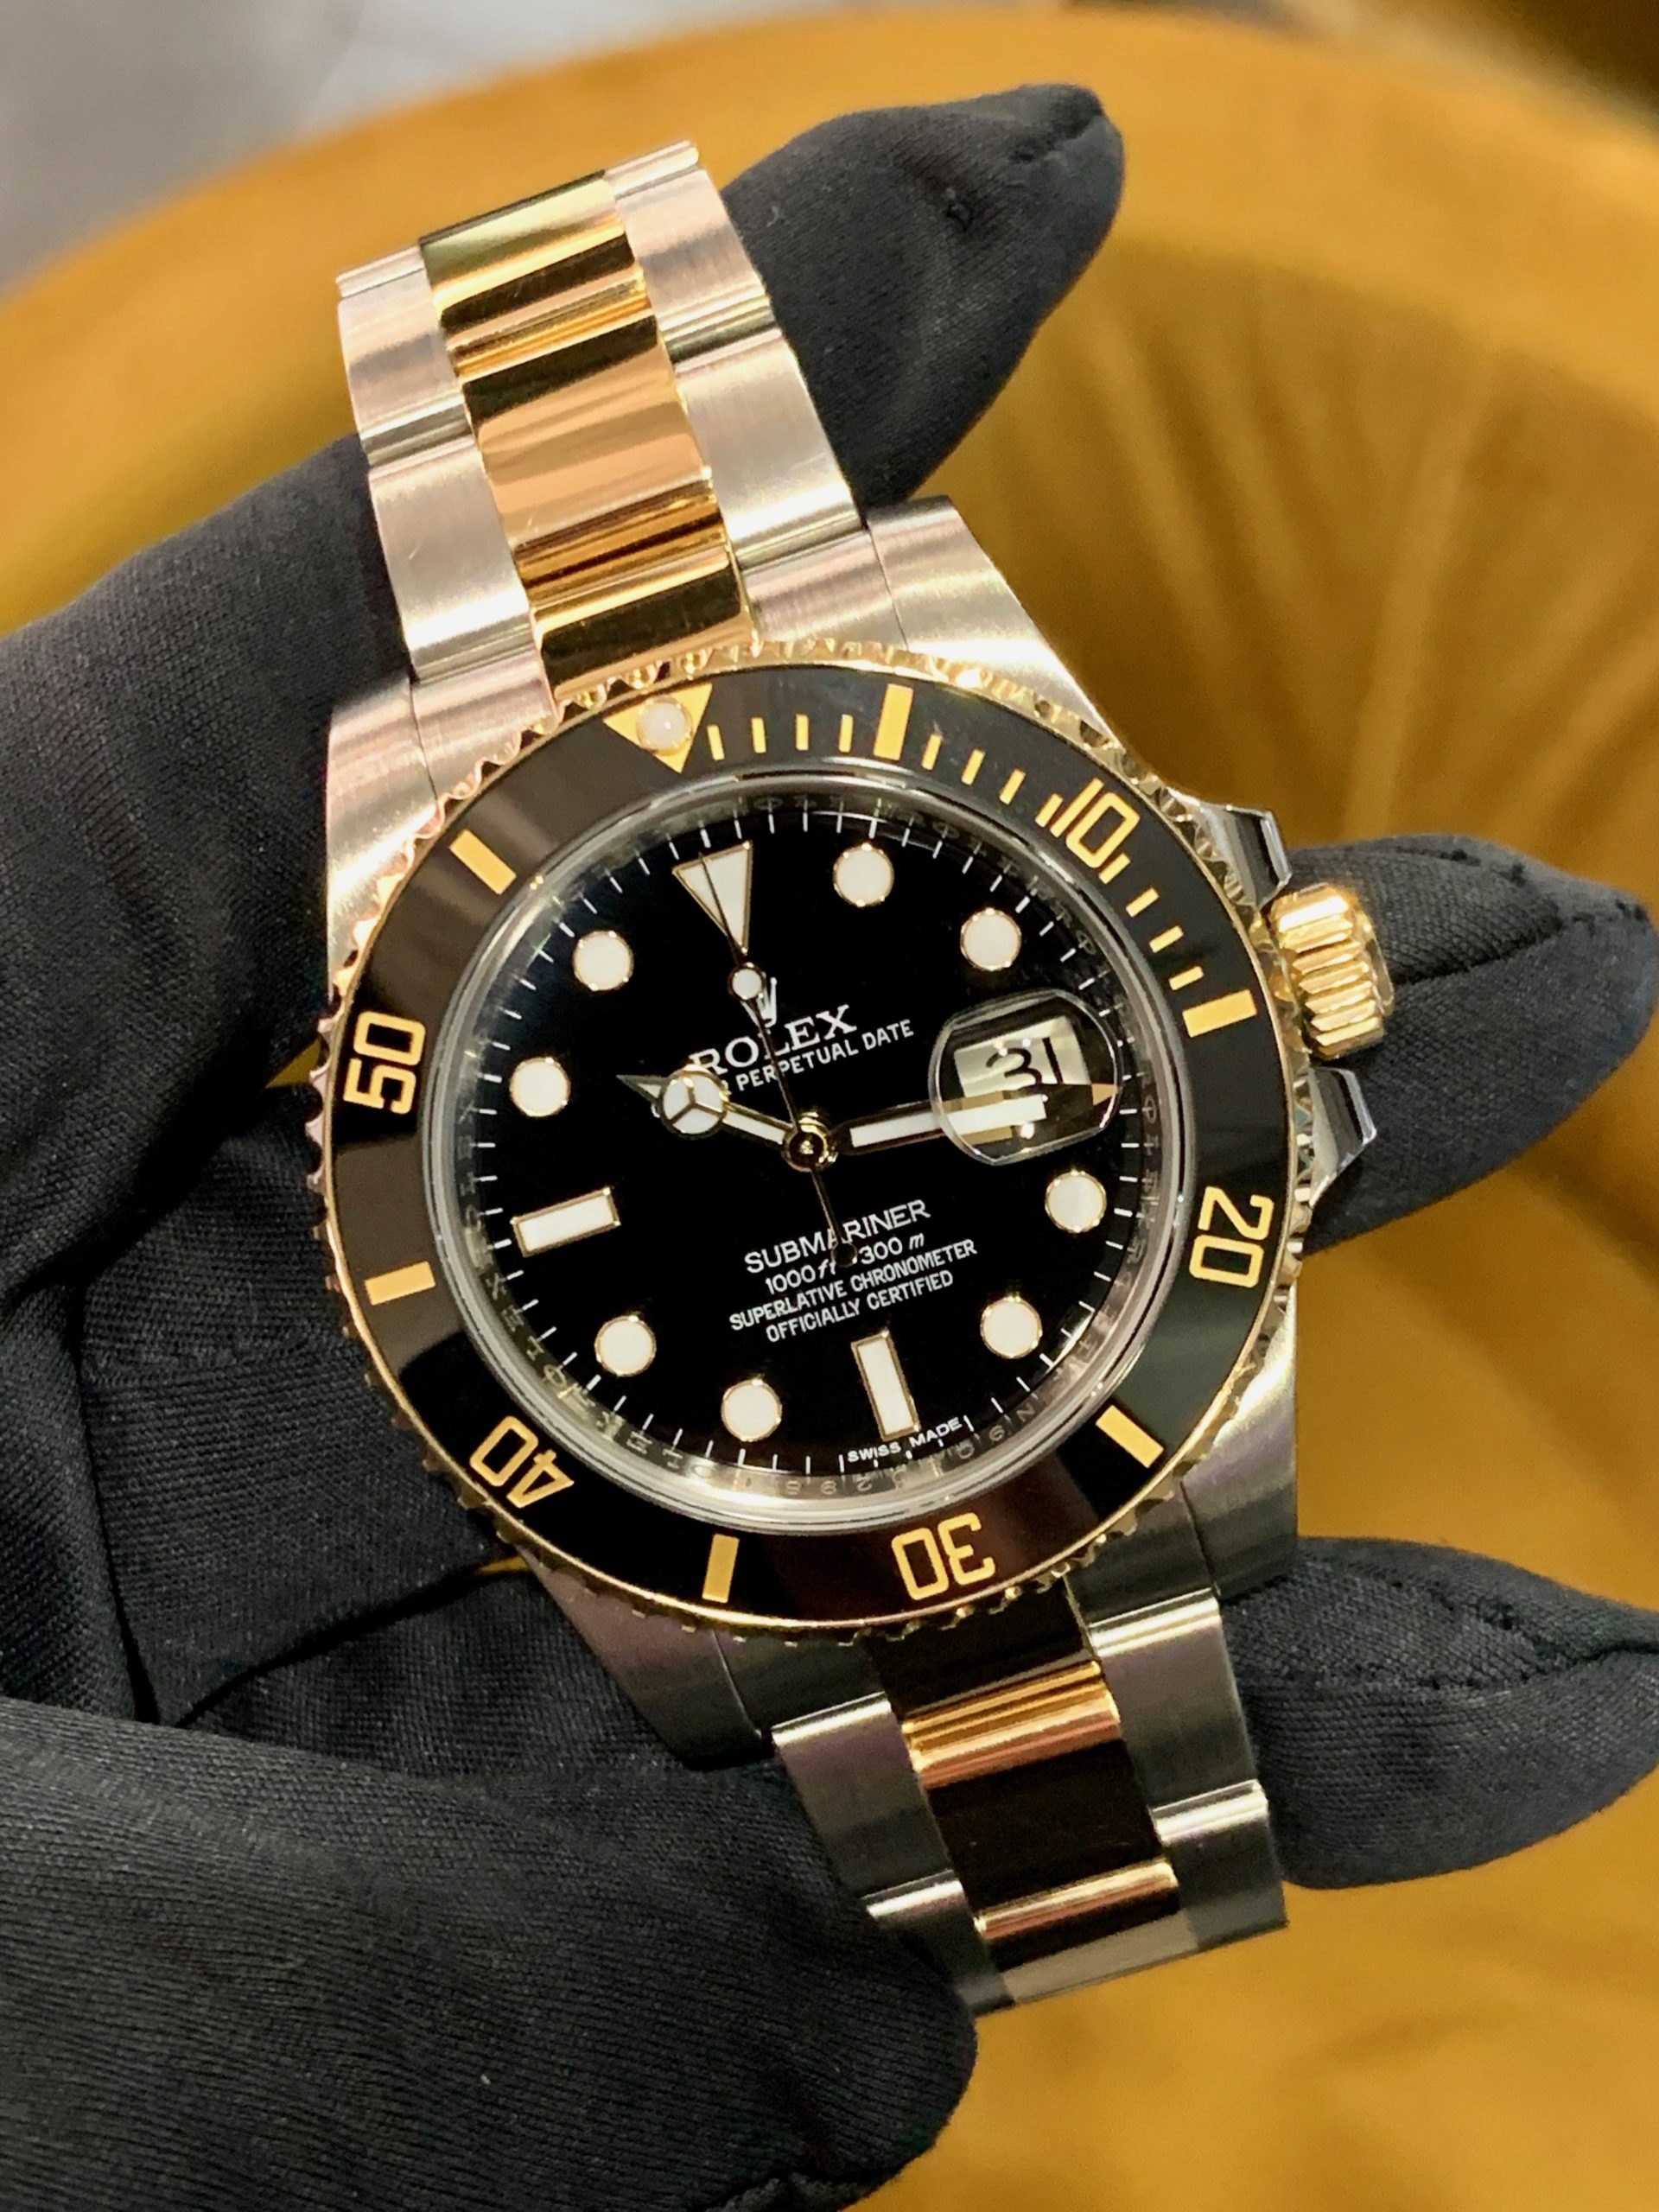 ROLEX SUBMARINER STAINLESS STEEL AND 18CT YELLOW GOLD 116613LN - Carr Rolex Submariner Stainless Steel Price